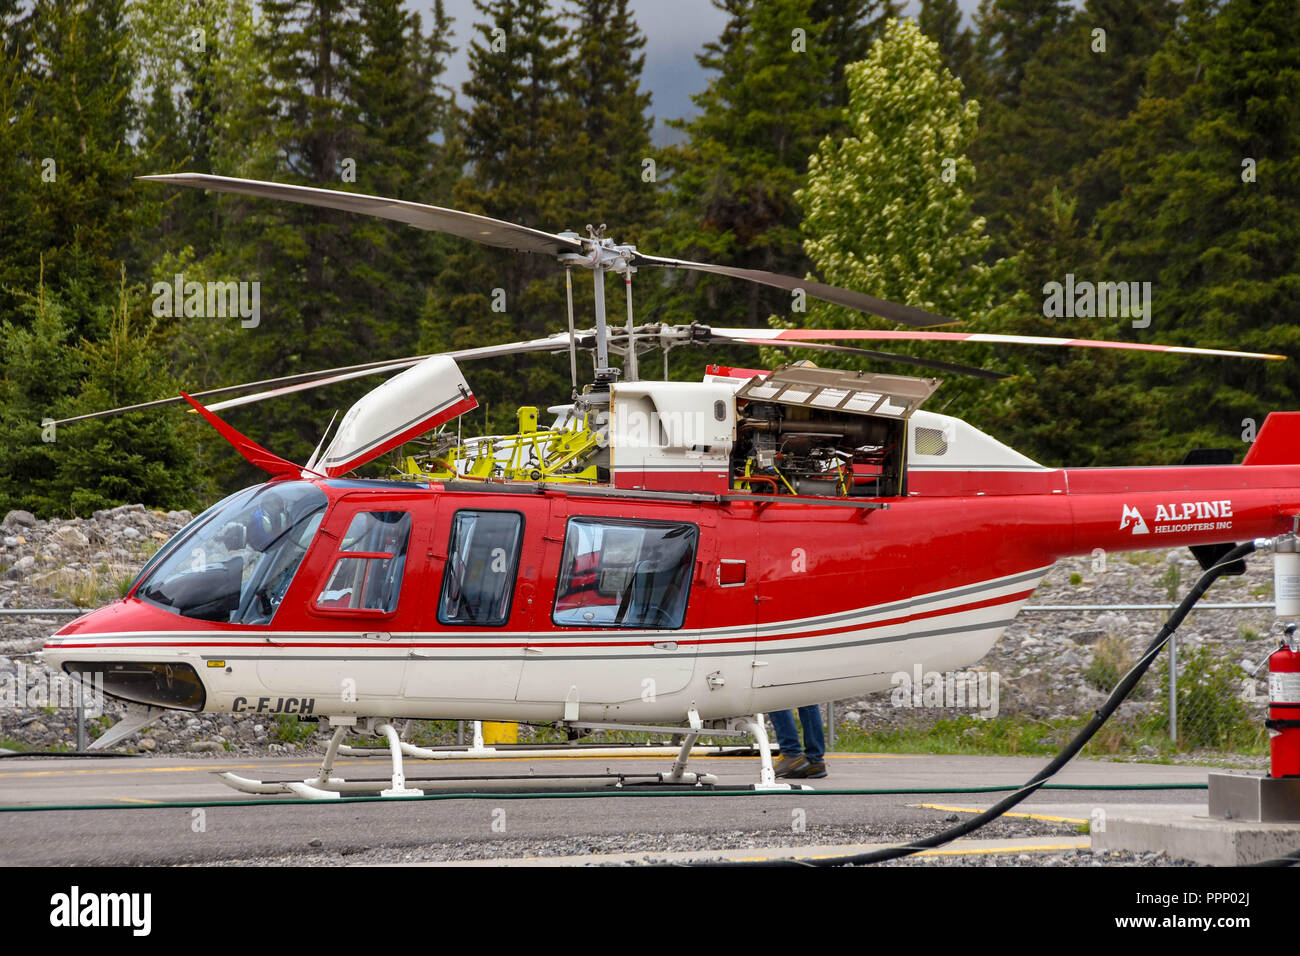 CANMORE, ALBERTA, CANADA - JUNE 2018: Bell 407 helicopter operated by Alpine Helicopters in Canmore. Its engine cover is open for maintenance. Stock Photo